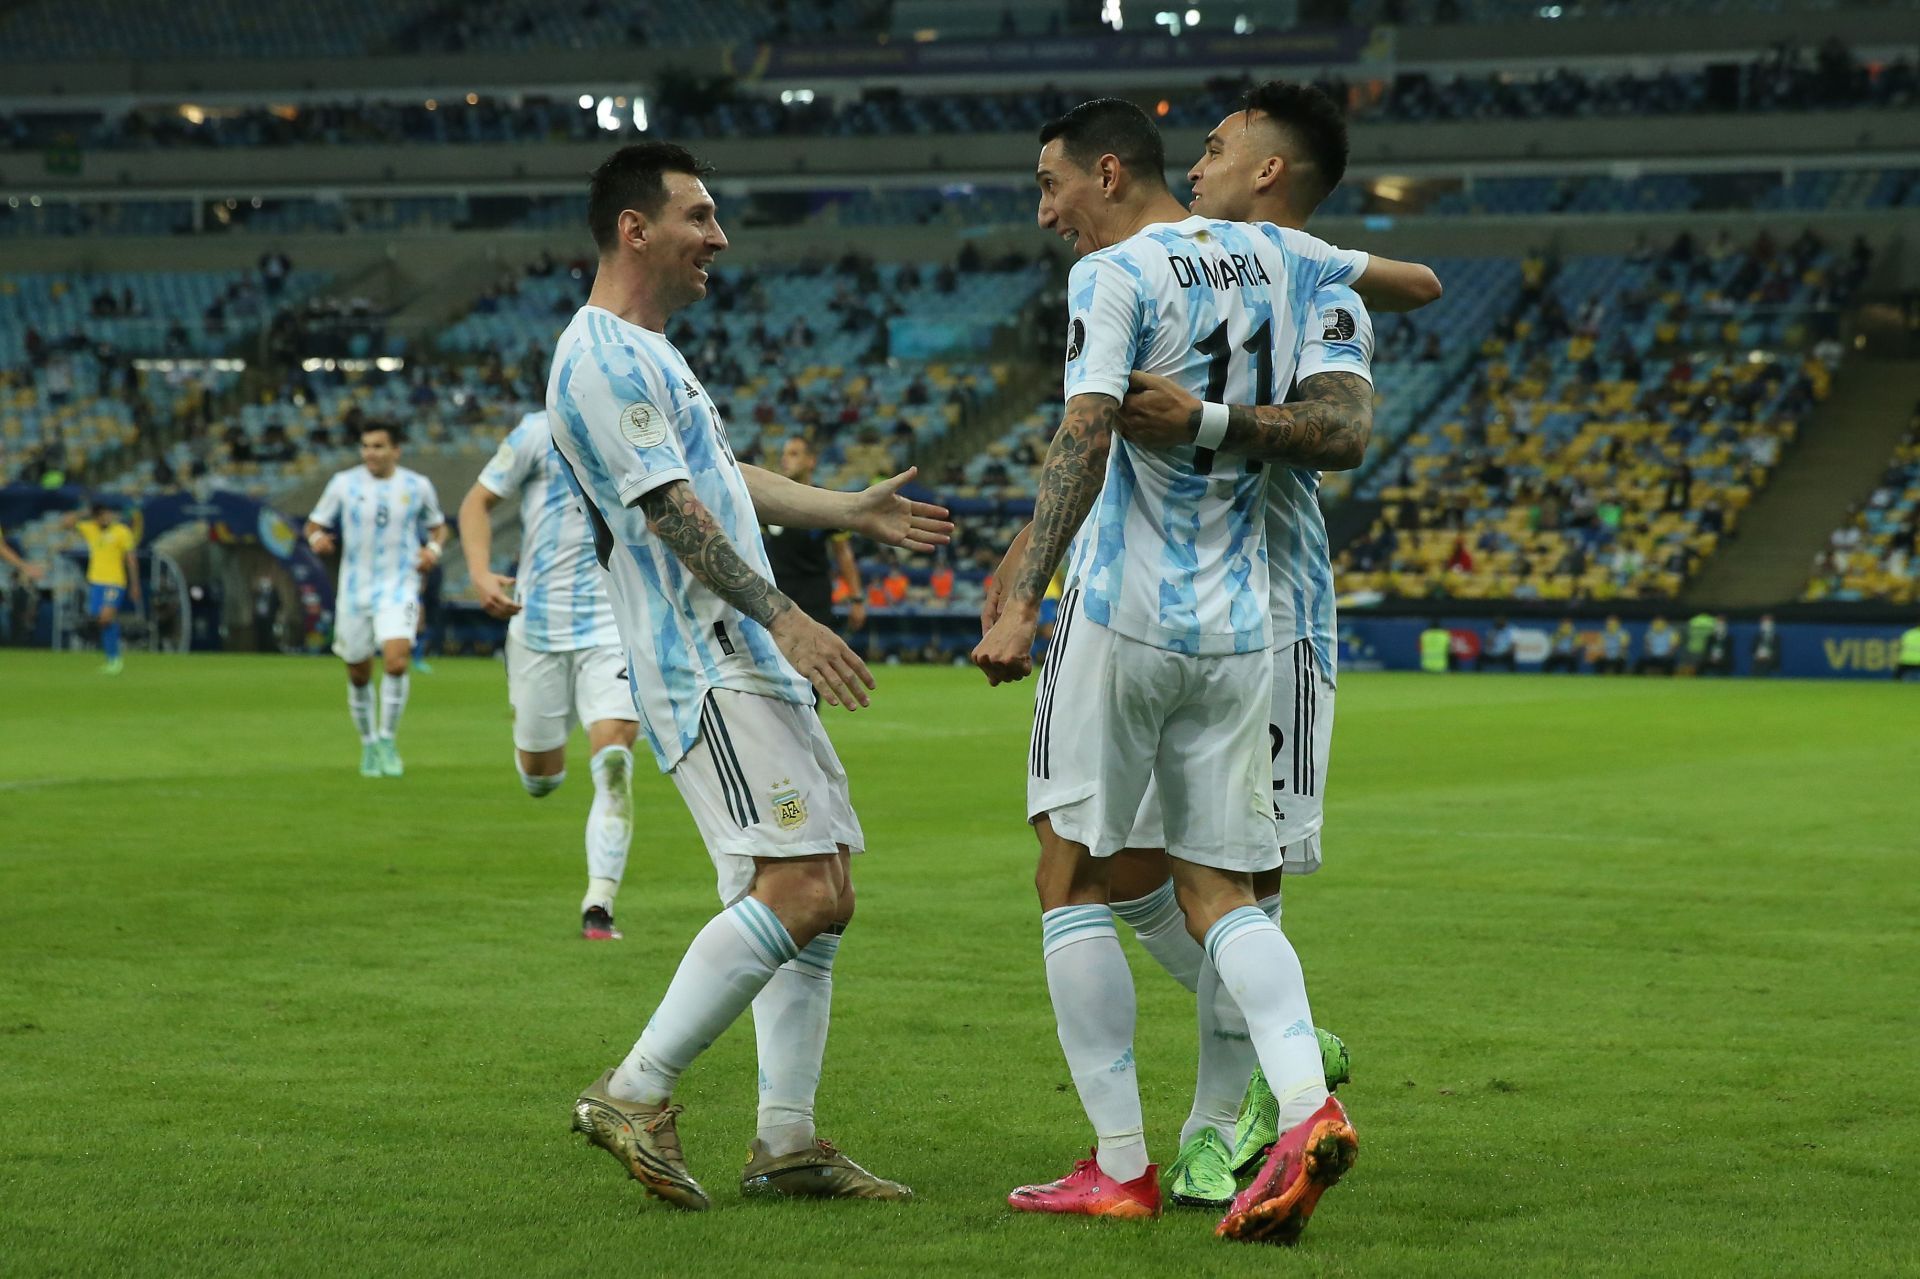 Argentina should not miss Messi too much against Chile tonight